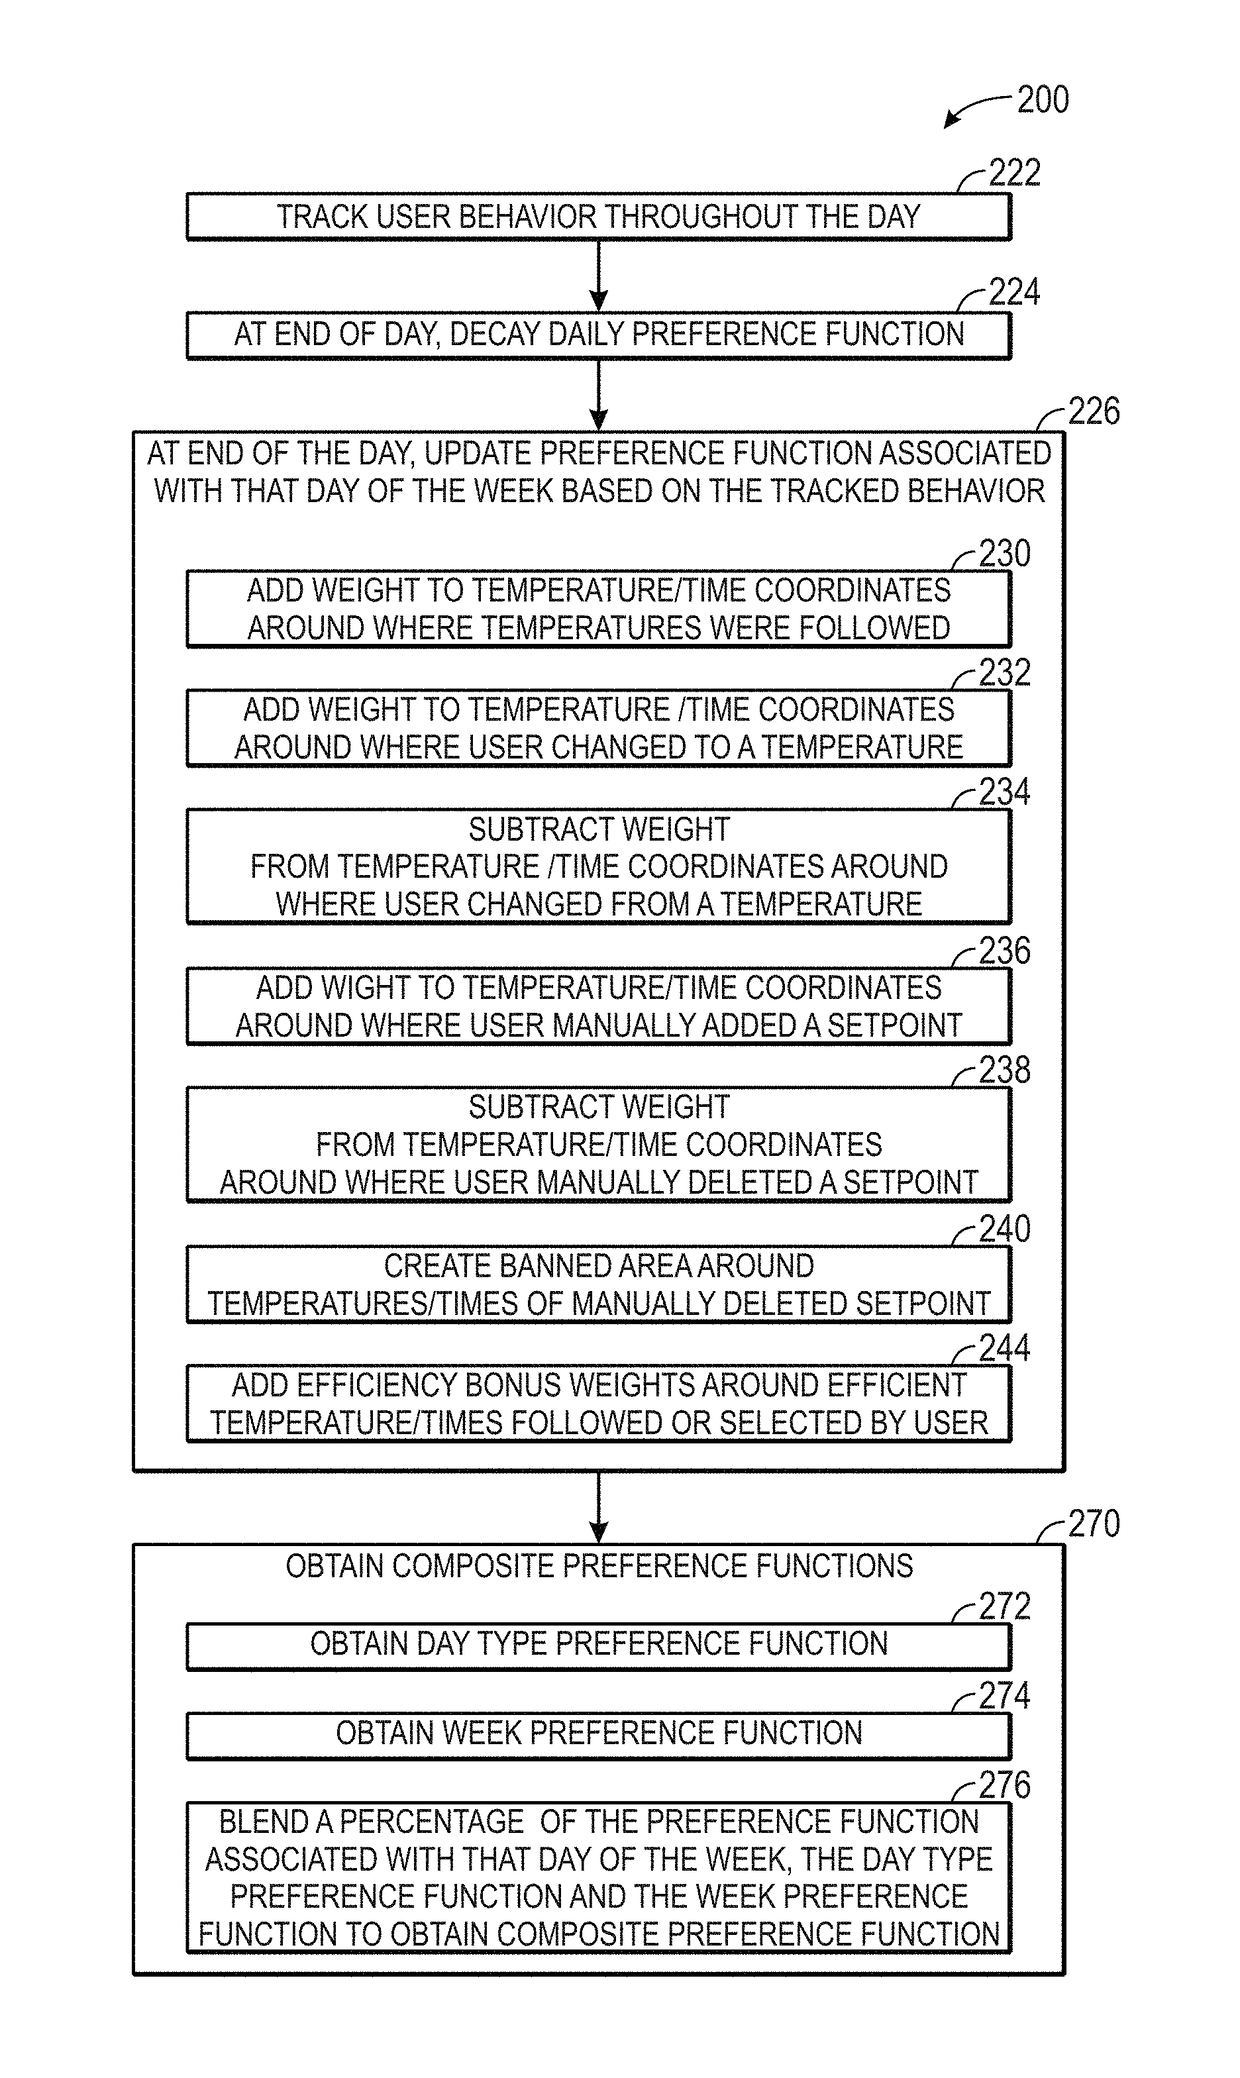 Enhanced automated environmental control system scheduling using a preference function